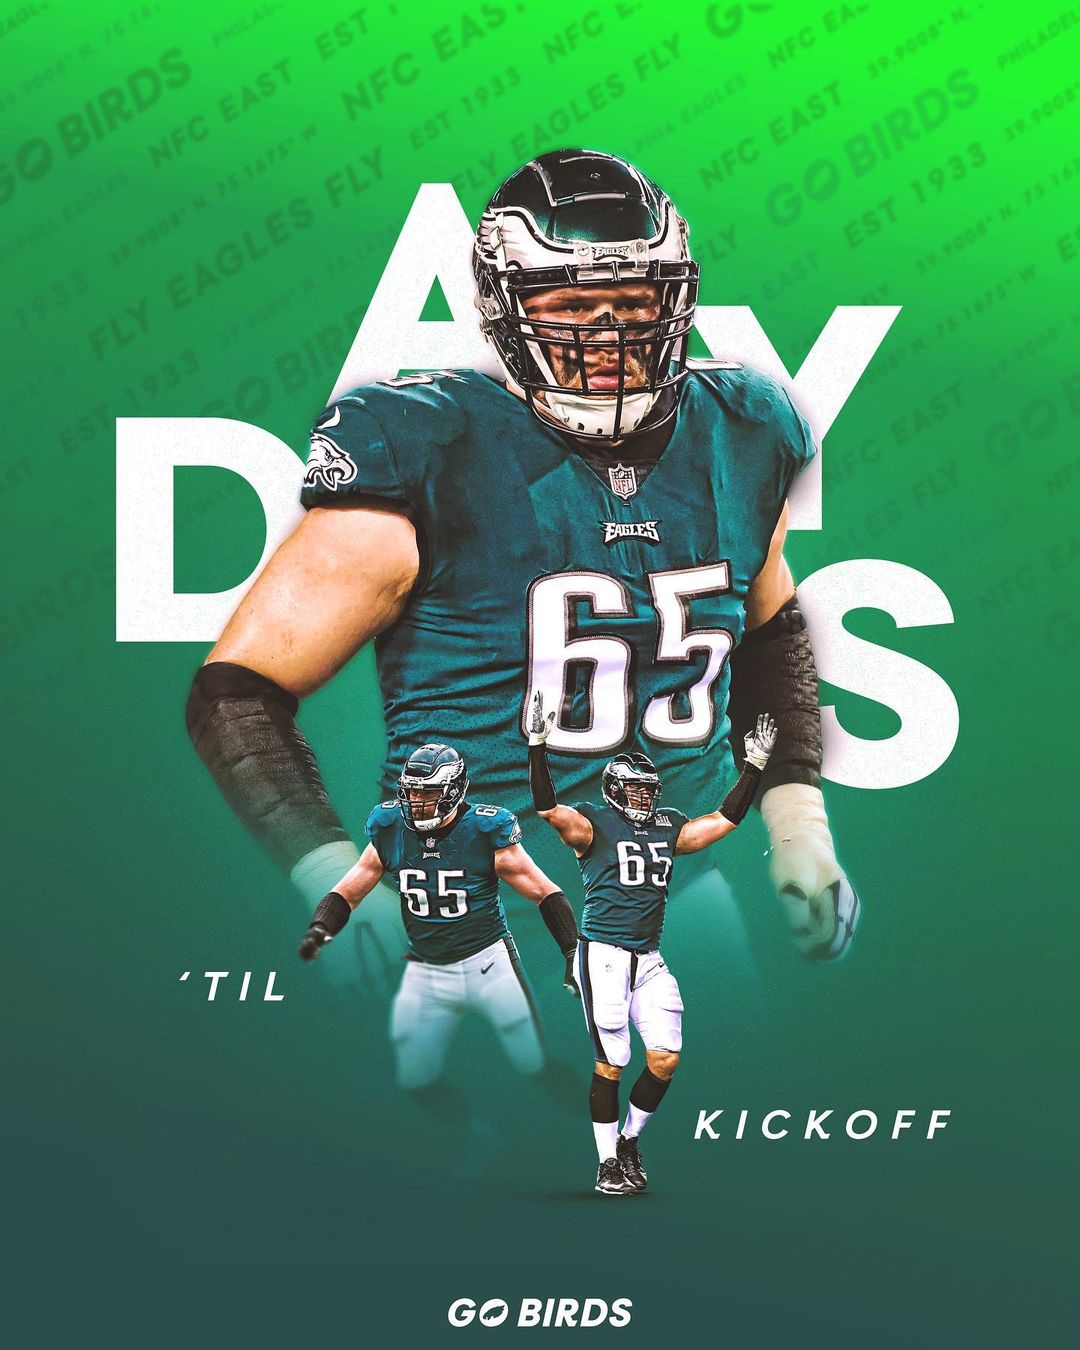 65 and counting  @lanejohnson65 | #FlyEaglesFly...